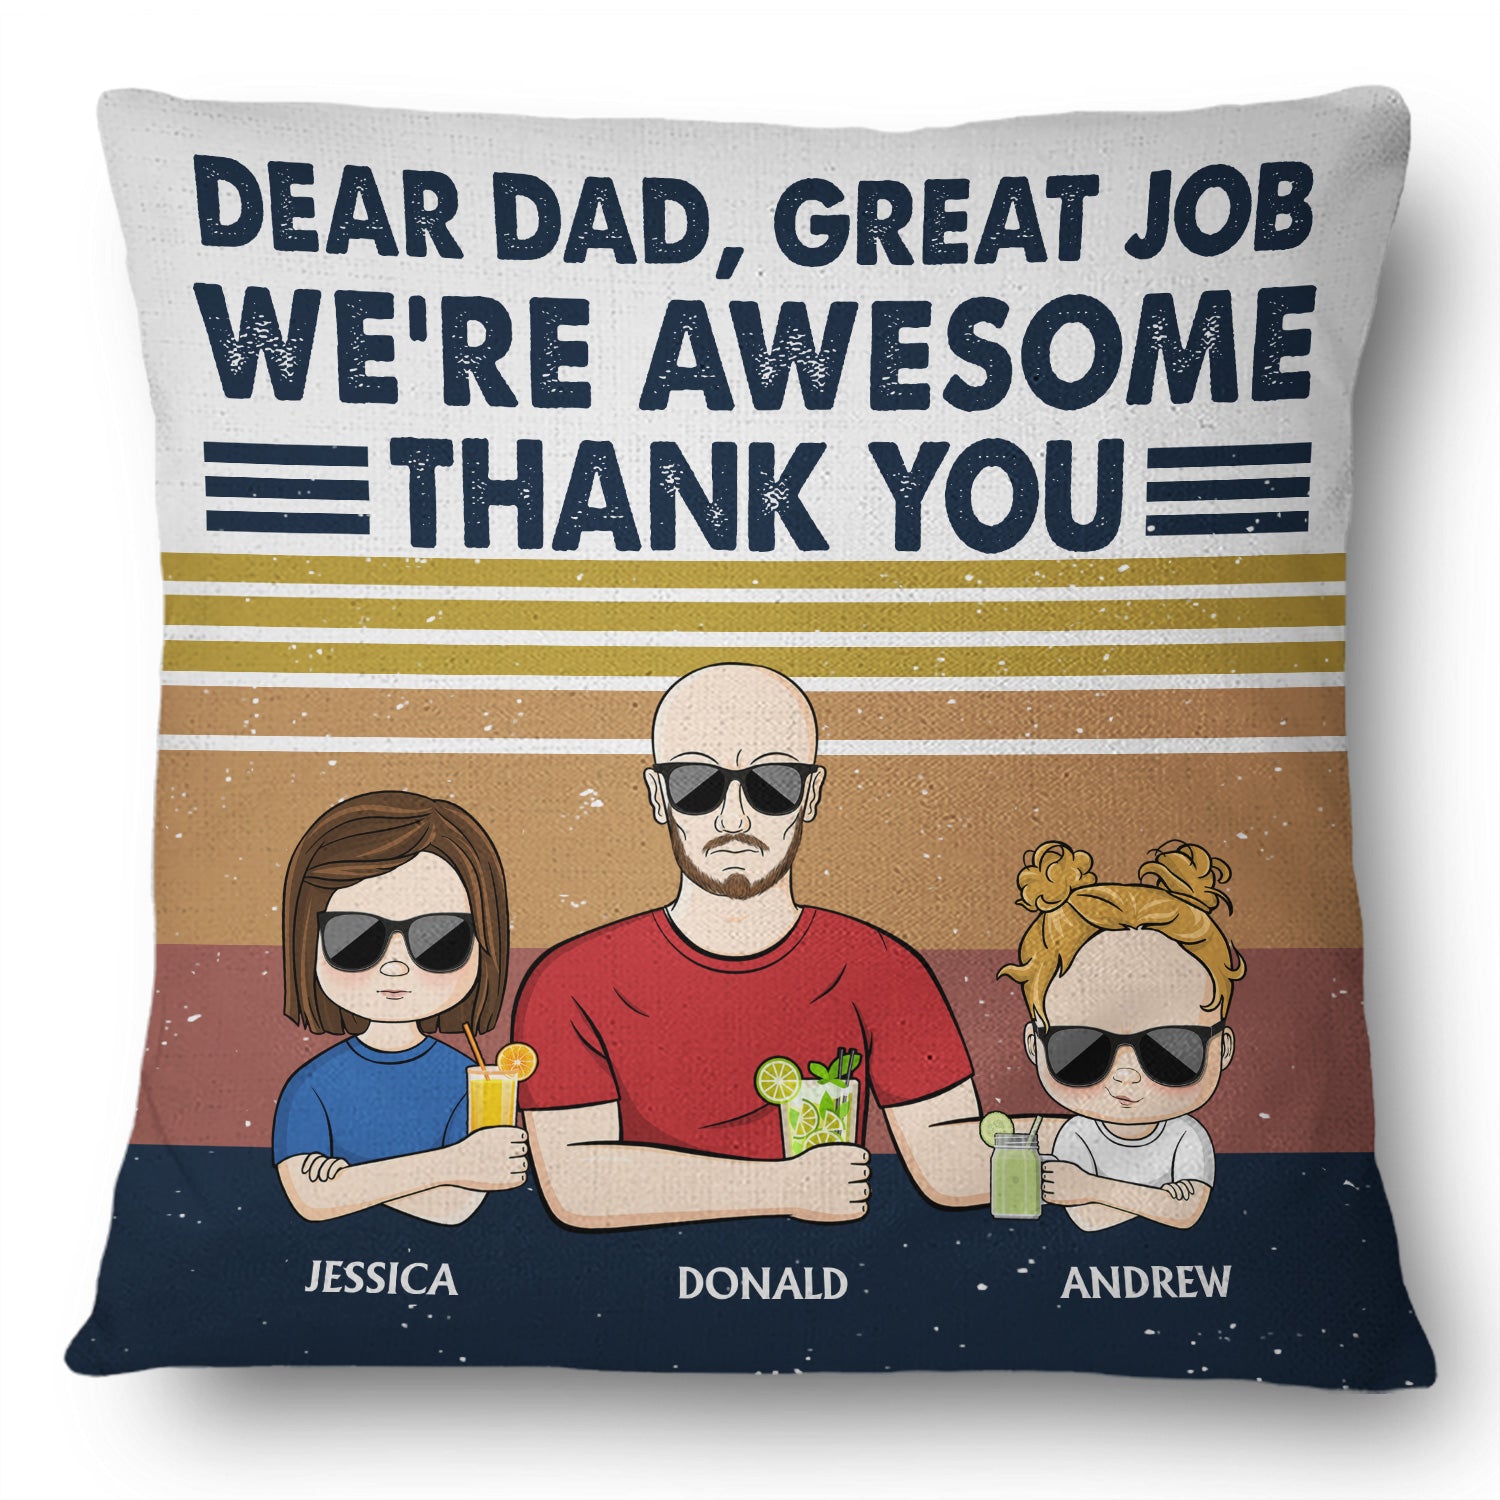 Dear Dad Great Job I'm Awesome Thank You Young - Birthday, Loving Gift For Dad, Father, Grandpa, Grandfather - Personalized Custom Pillow